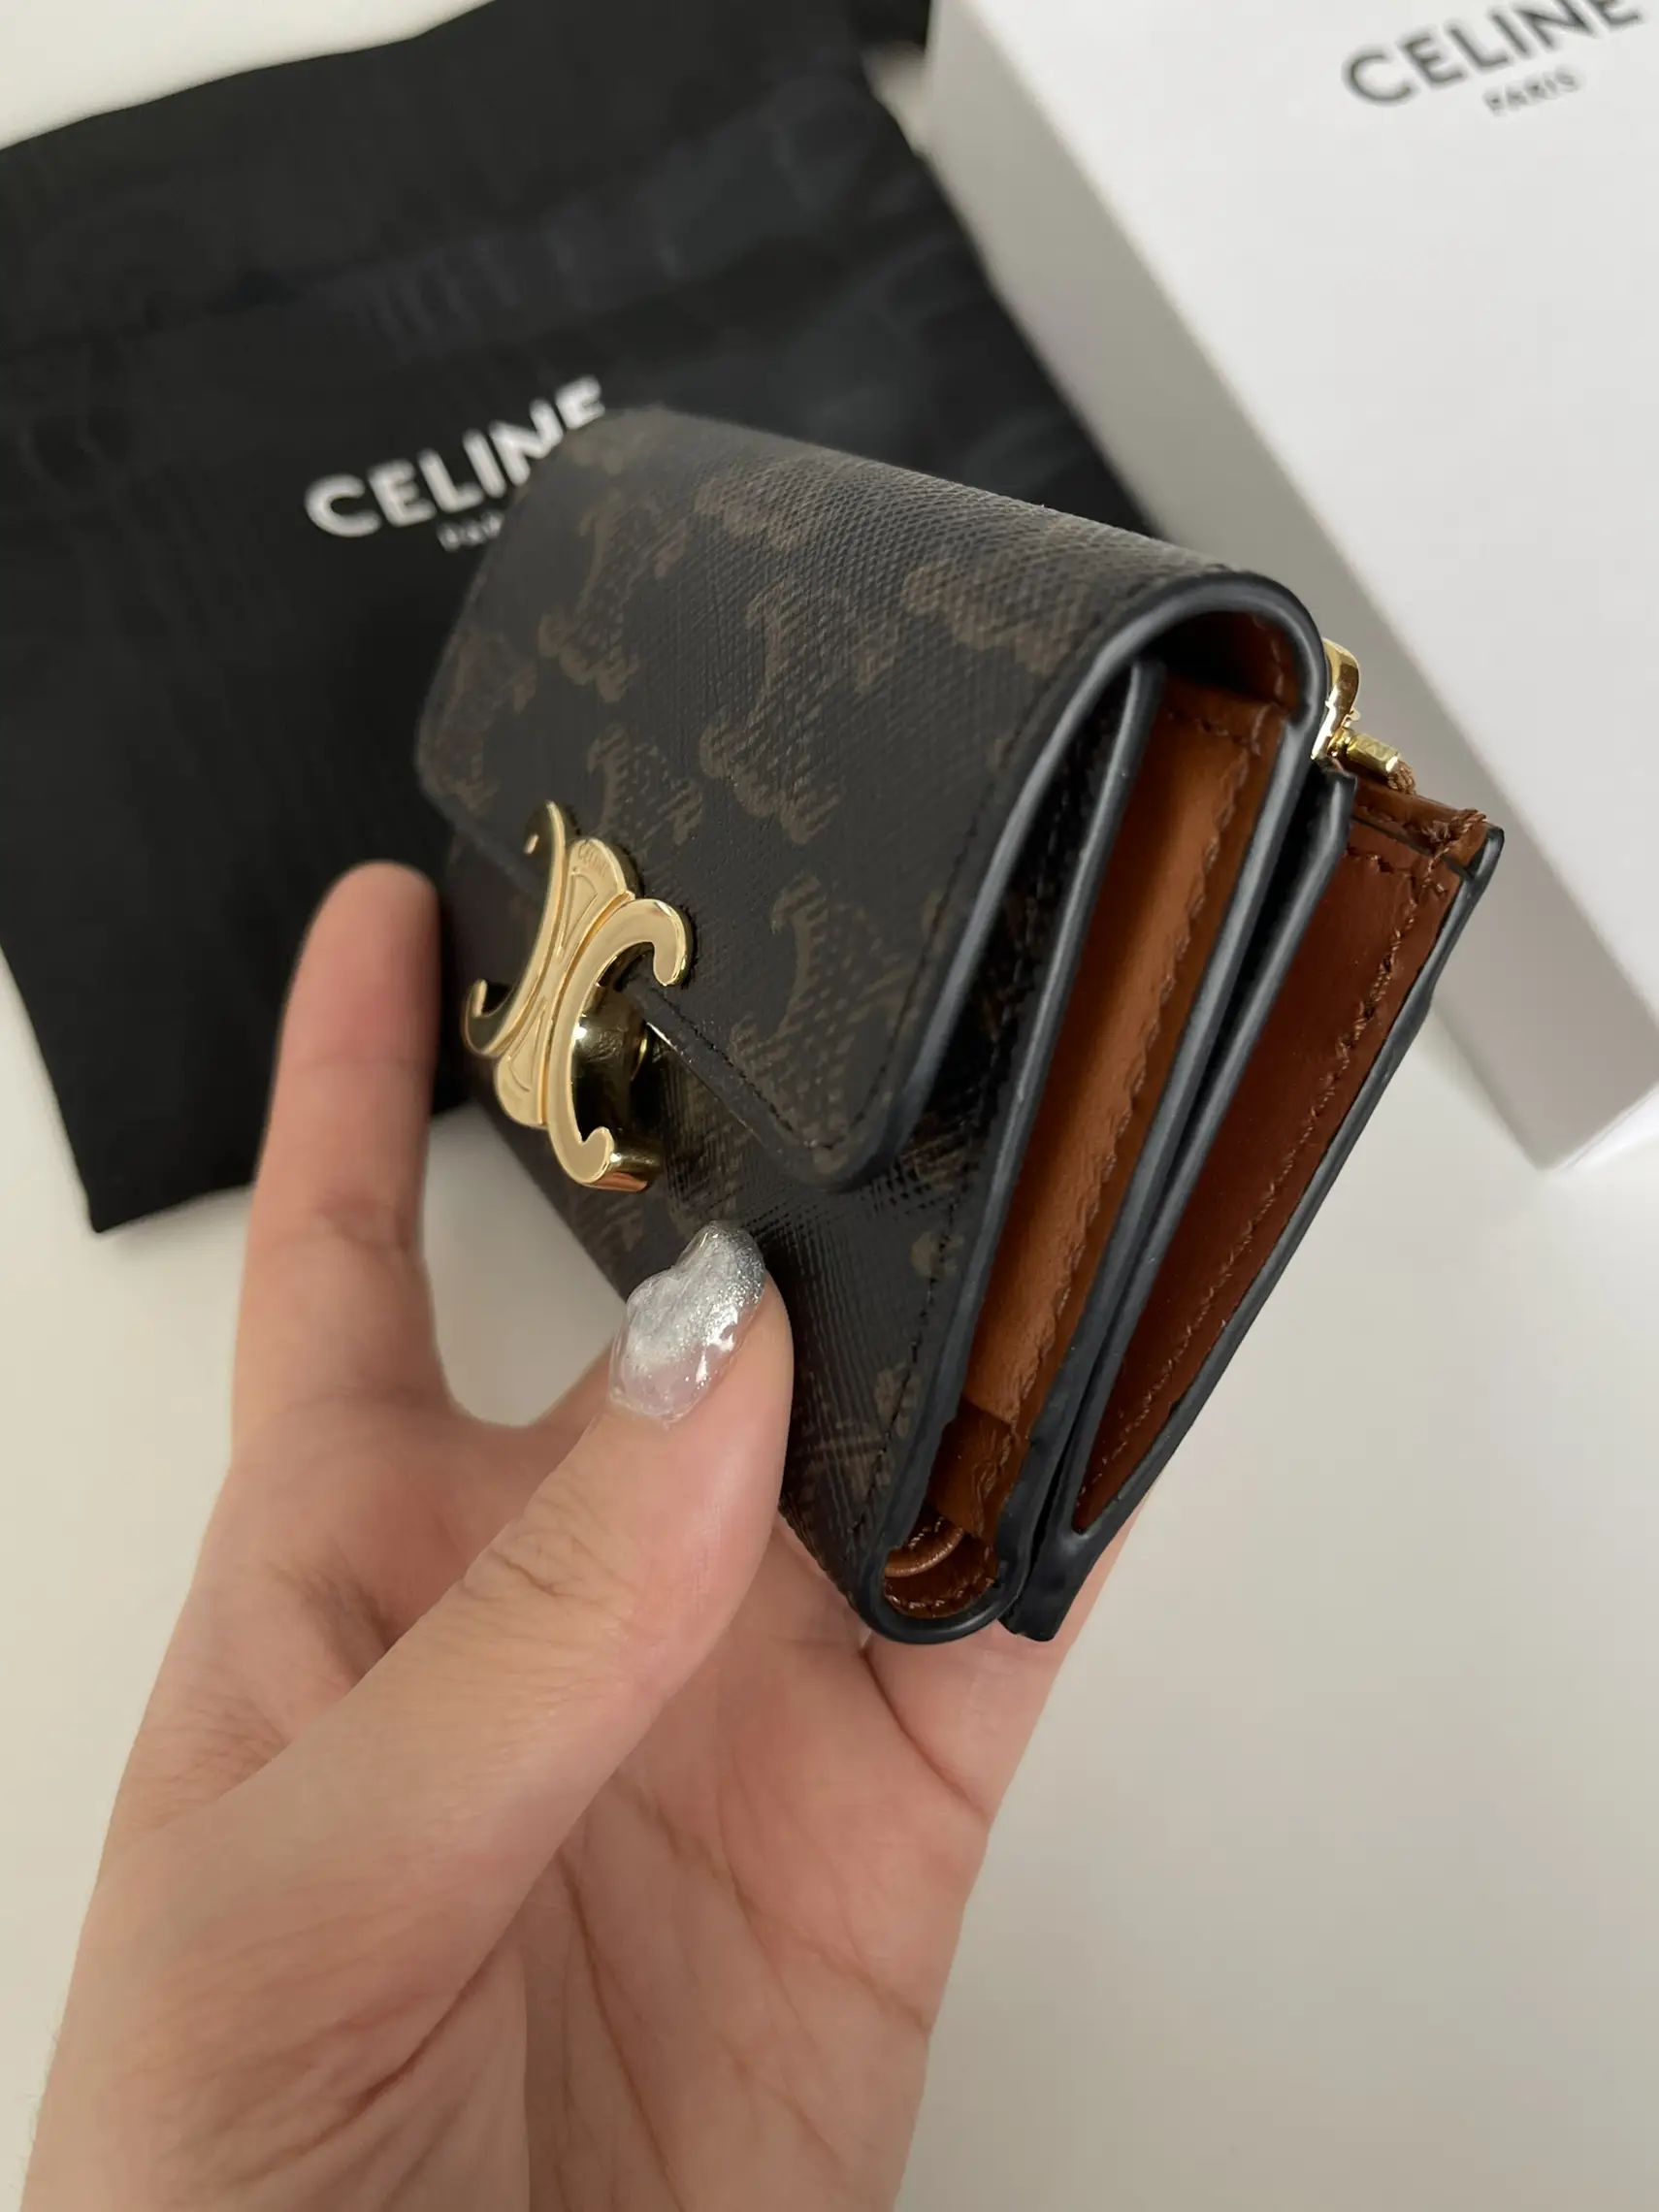 CELINE 24k wallet, can you buy it? 🤔💭 | Gallery posted by